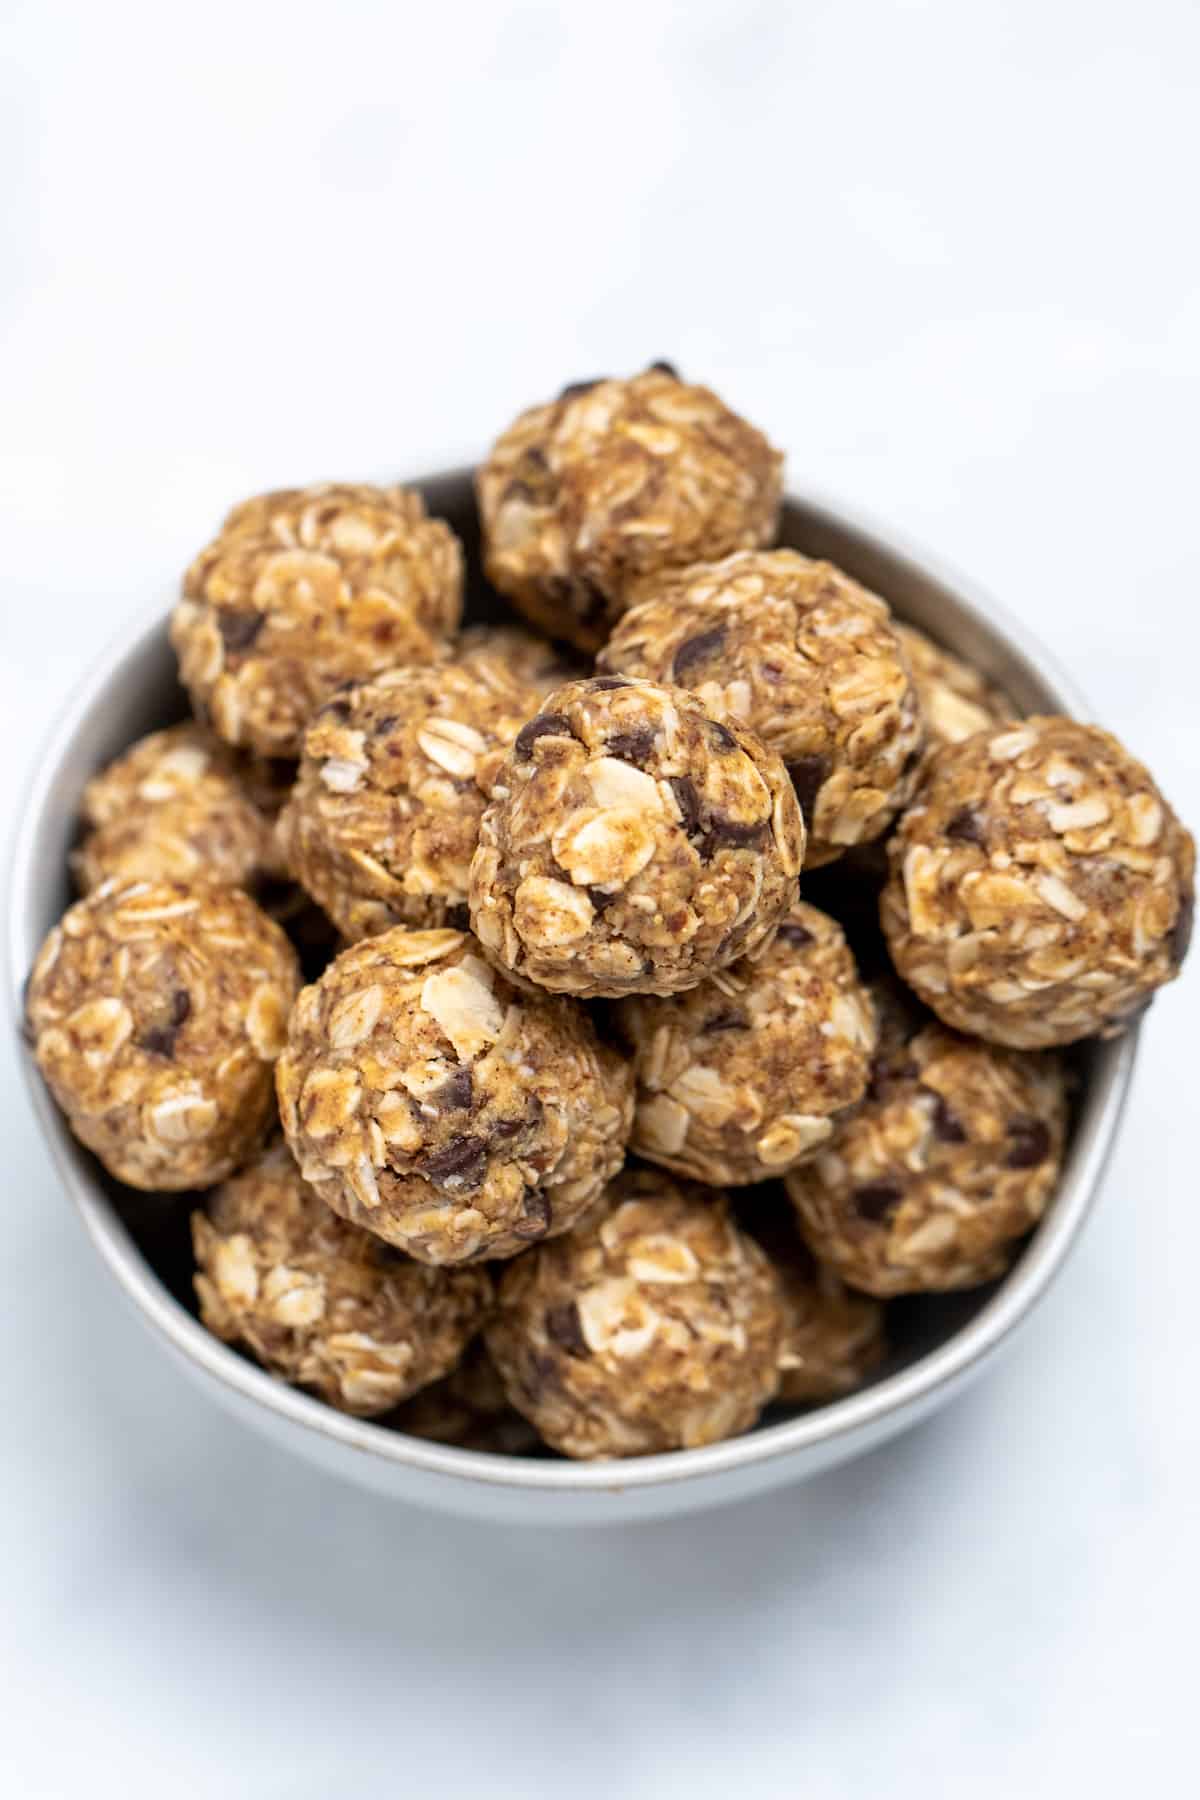 A bowl full of peanut butter oat balls on a table.